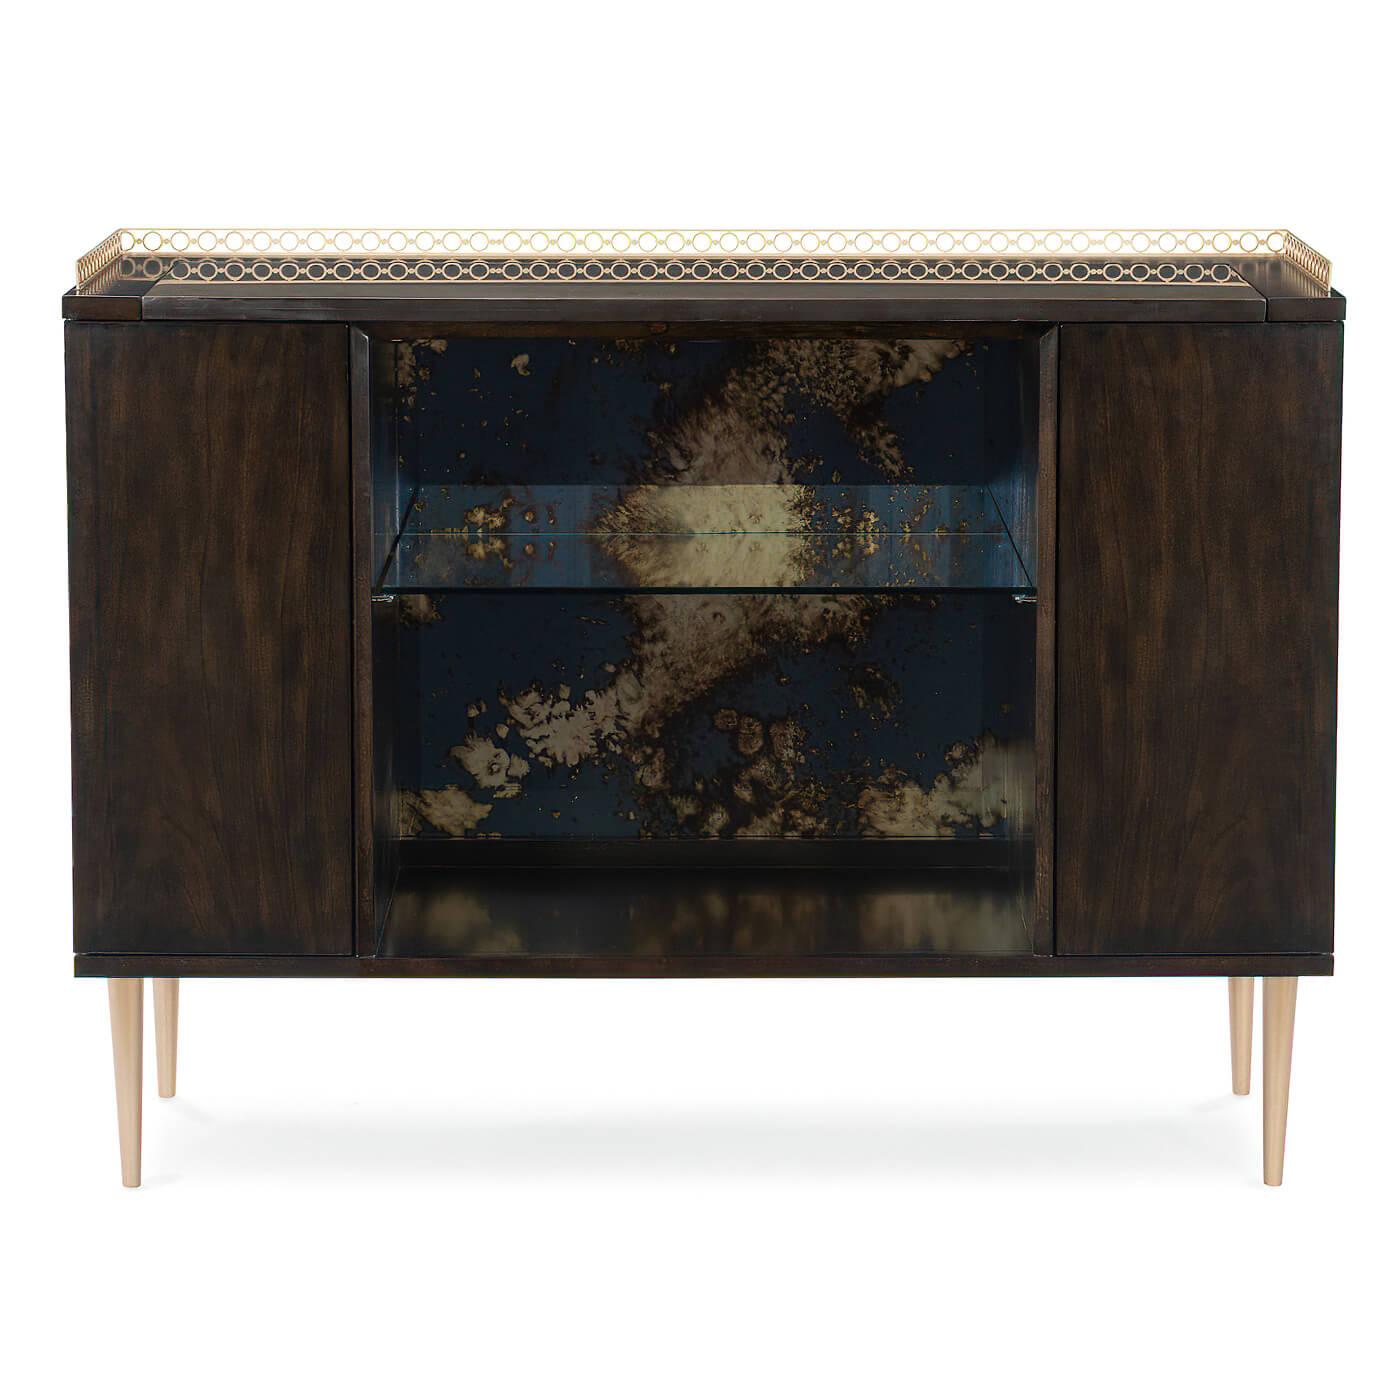 A mid-century-style bronzed ebony bar cabinet with a Koris Coffee Stone top outlined with a pierced metal gallery finished in Warm Silver Metallic paint. An open center section reveals an antiqued mirrored back and glass shelf illuminated by a touch